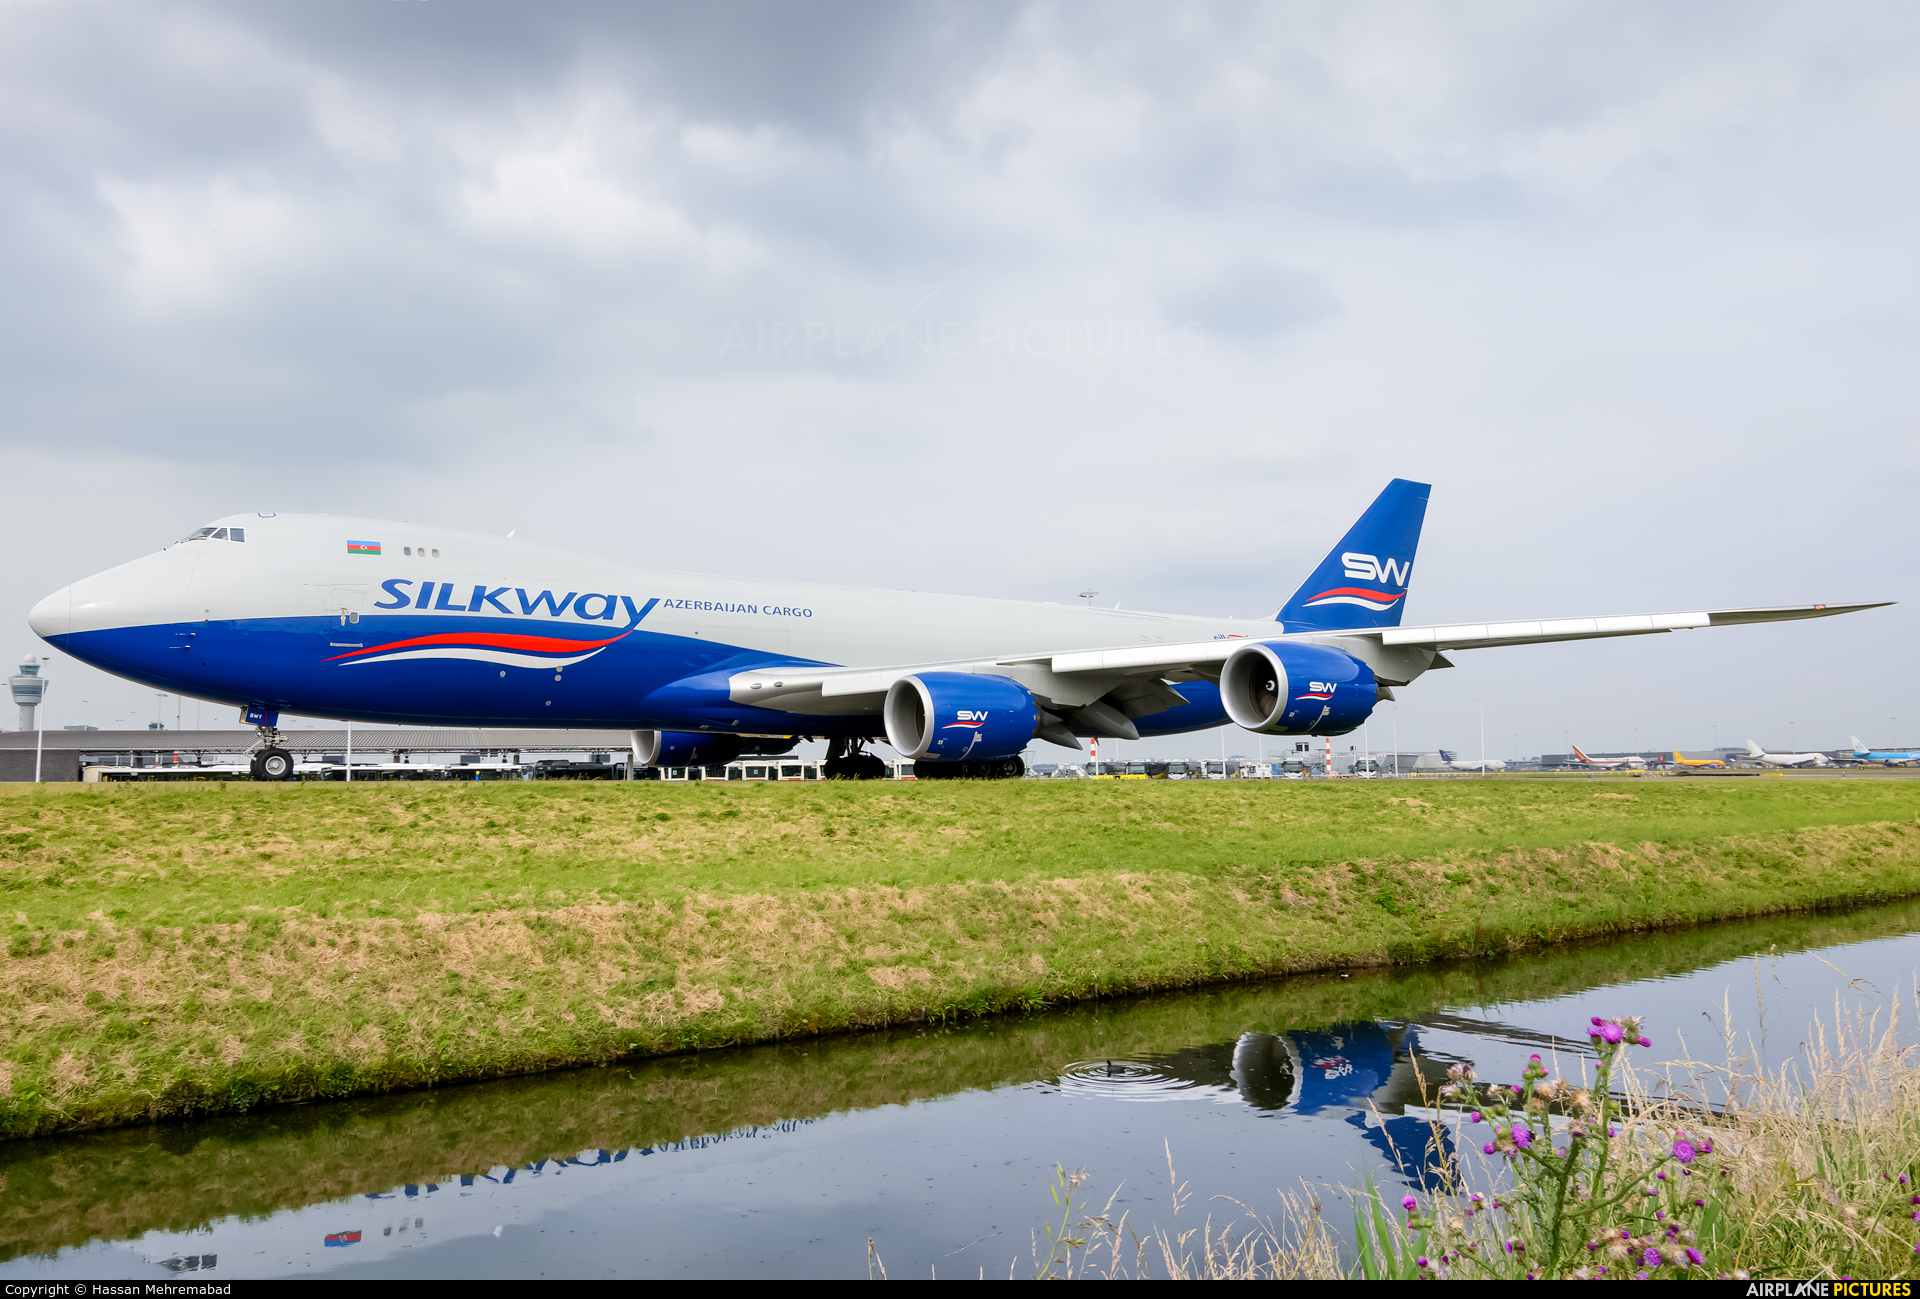 Silk Way Airlines VQ-BWY aircraft at Amsterdam - Schiphol